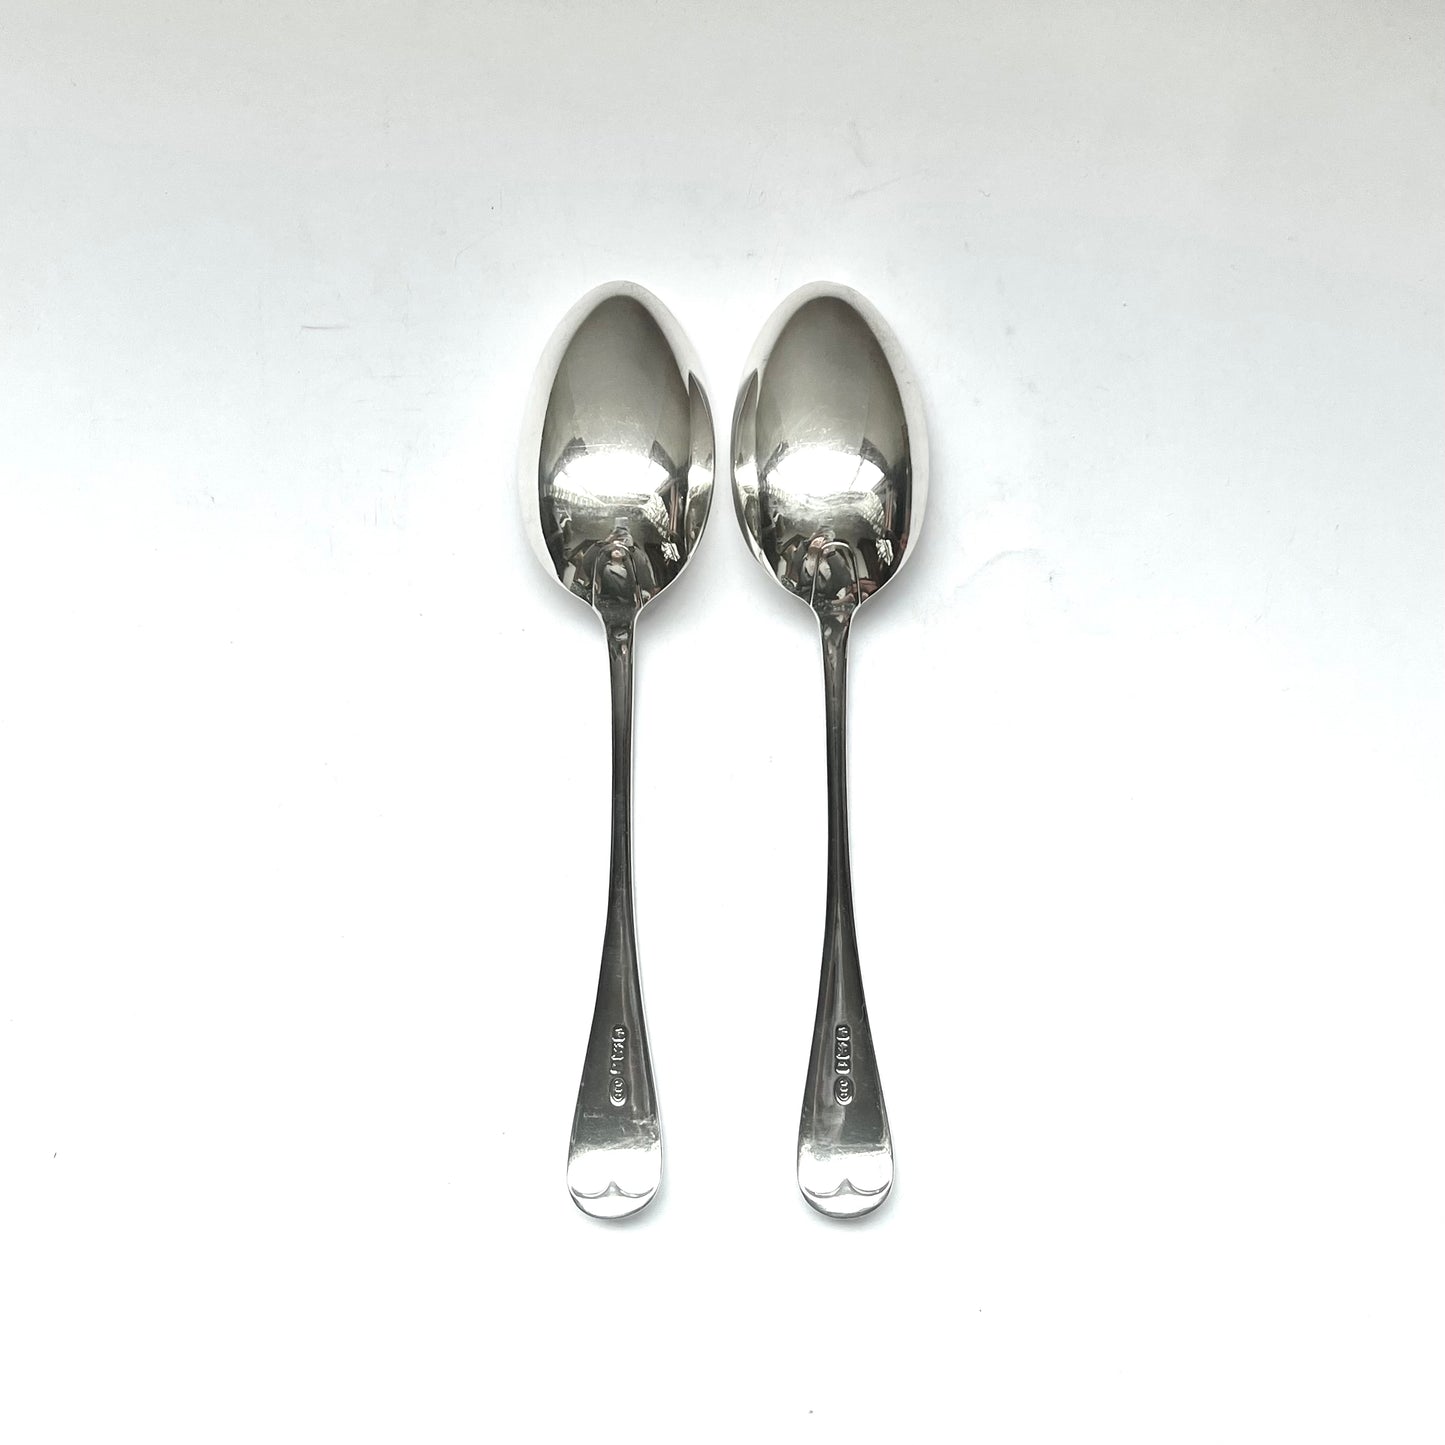 Pair of George V crested sterling silver spoons with marks for Joseph Rodgers & Sons, Sheffield, 1911.